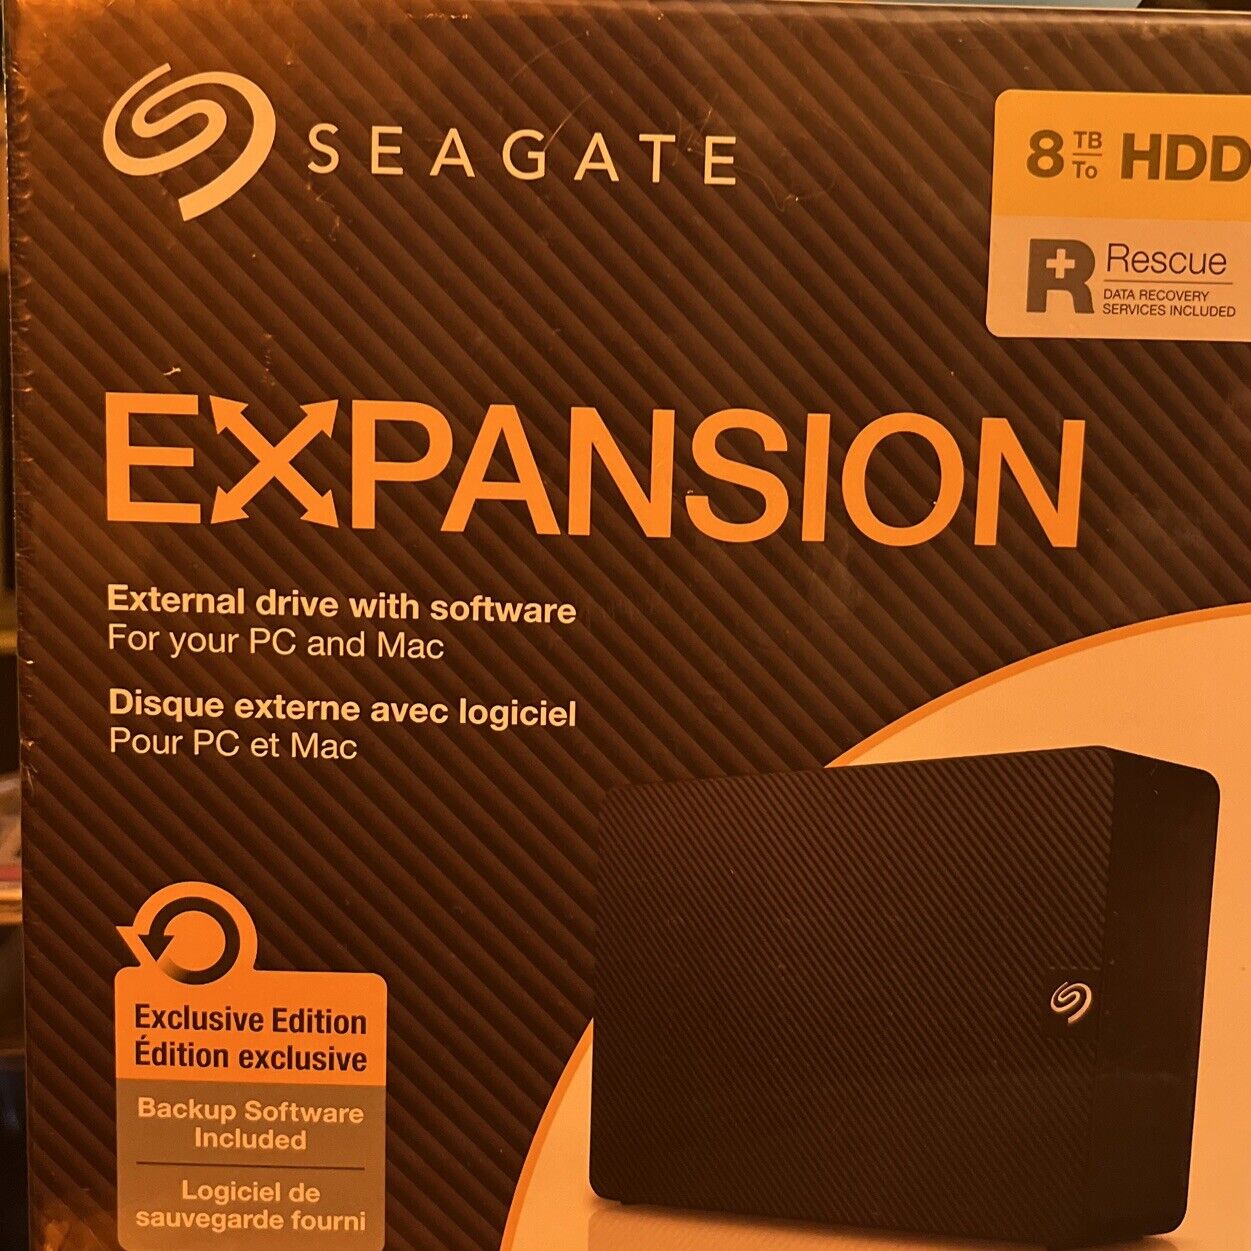 seagate expansion external hard drive With Software Stkr8000400